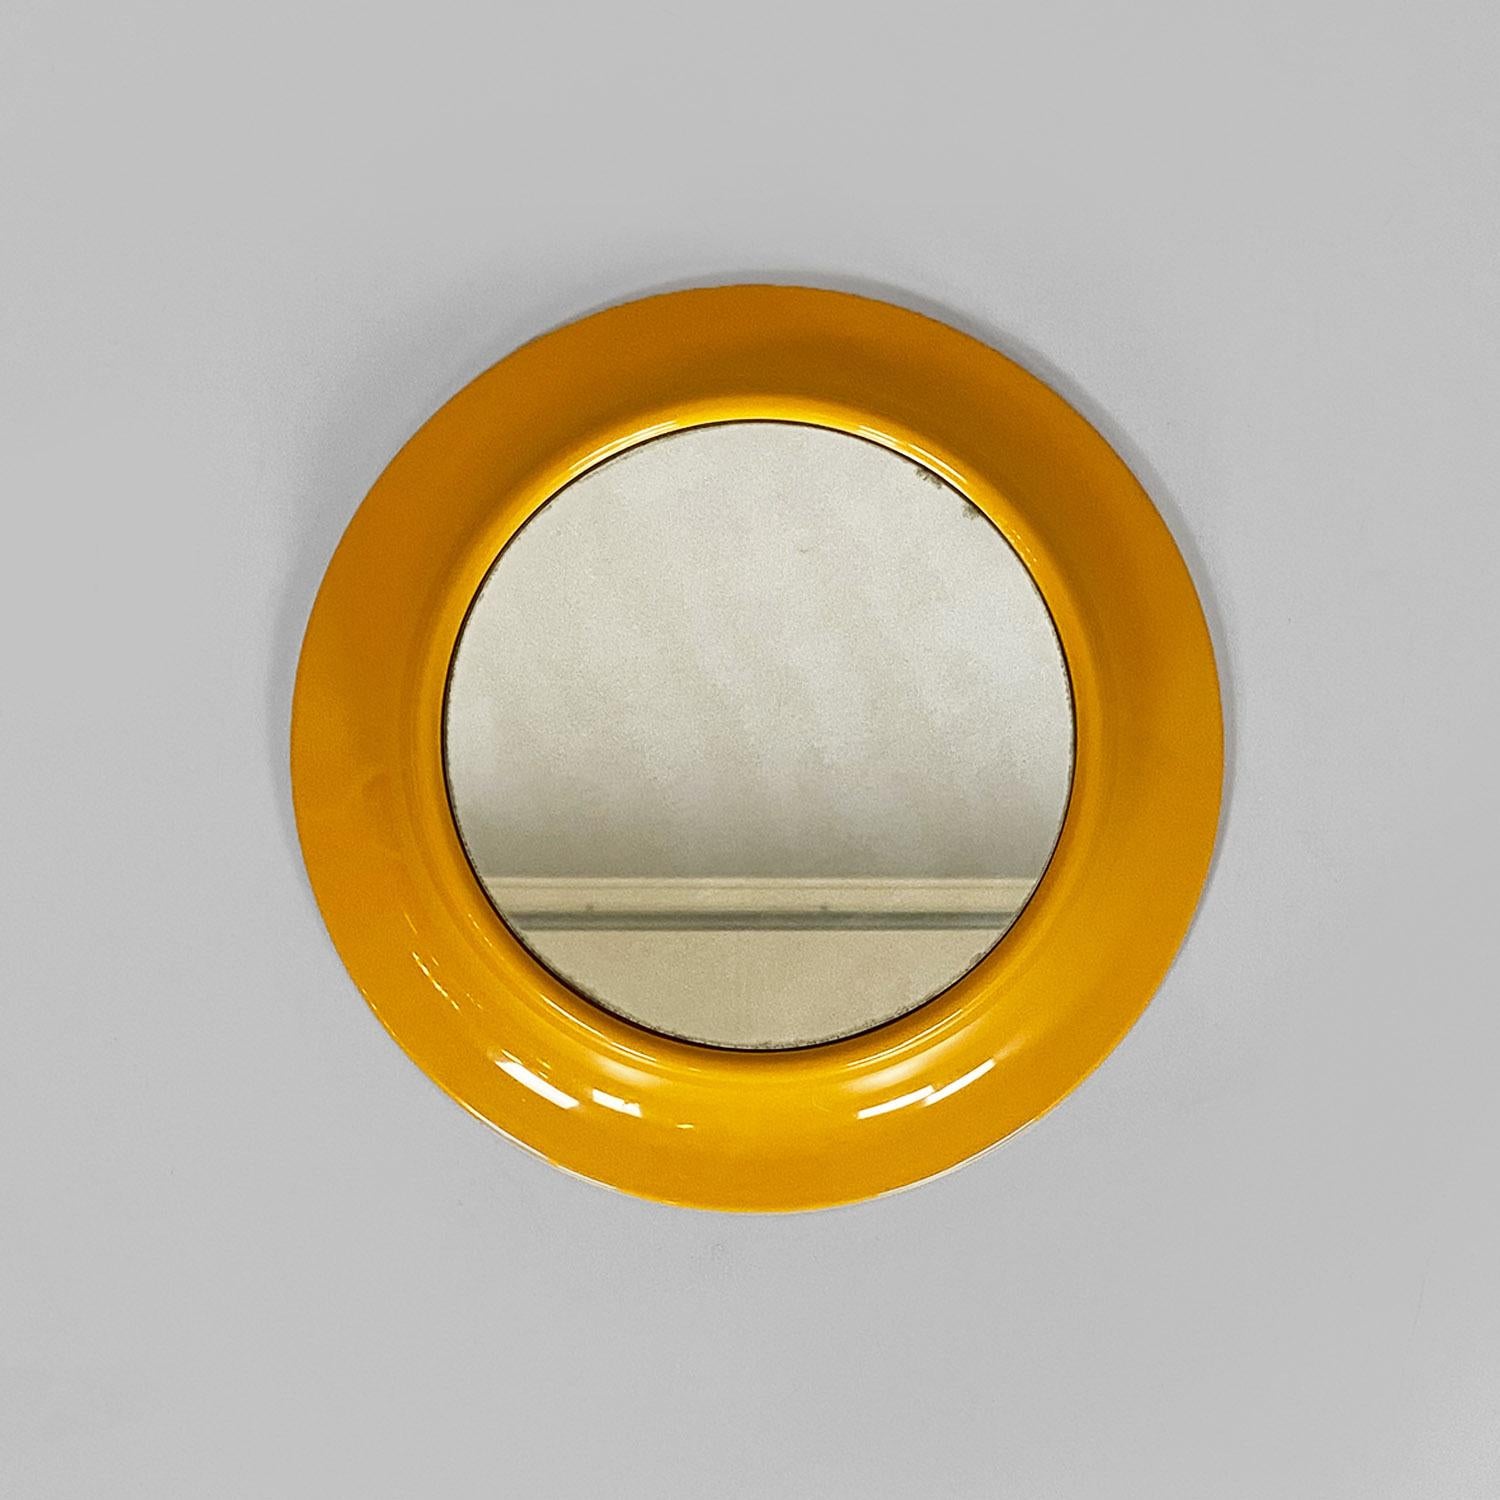 Italian modern round yellow ocher plastic mirror by Cattaneo Italy, 1980s
Round mirror model 080, small in size, with round ocher yellow plastic frame.
Branded Cattaneo, produced in Italy in approx. 1980.
Good condition, visible marks on the